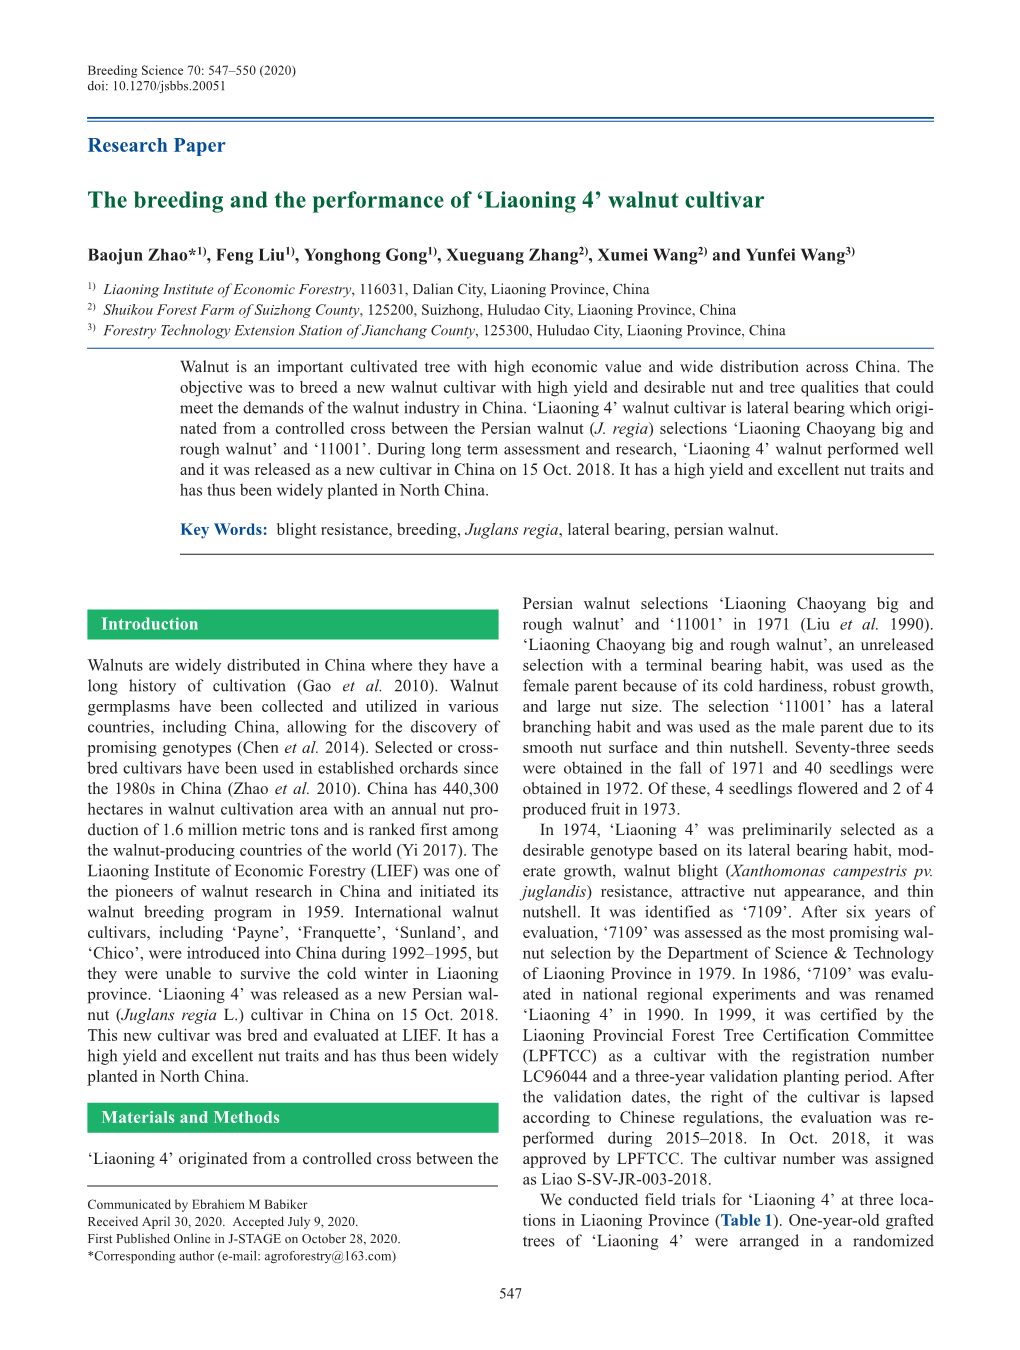 The Breeding and the Performance of 'Liaoning 4' Walnut Cultivar